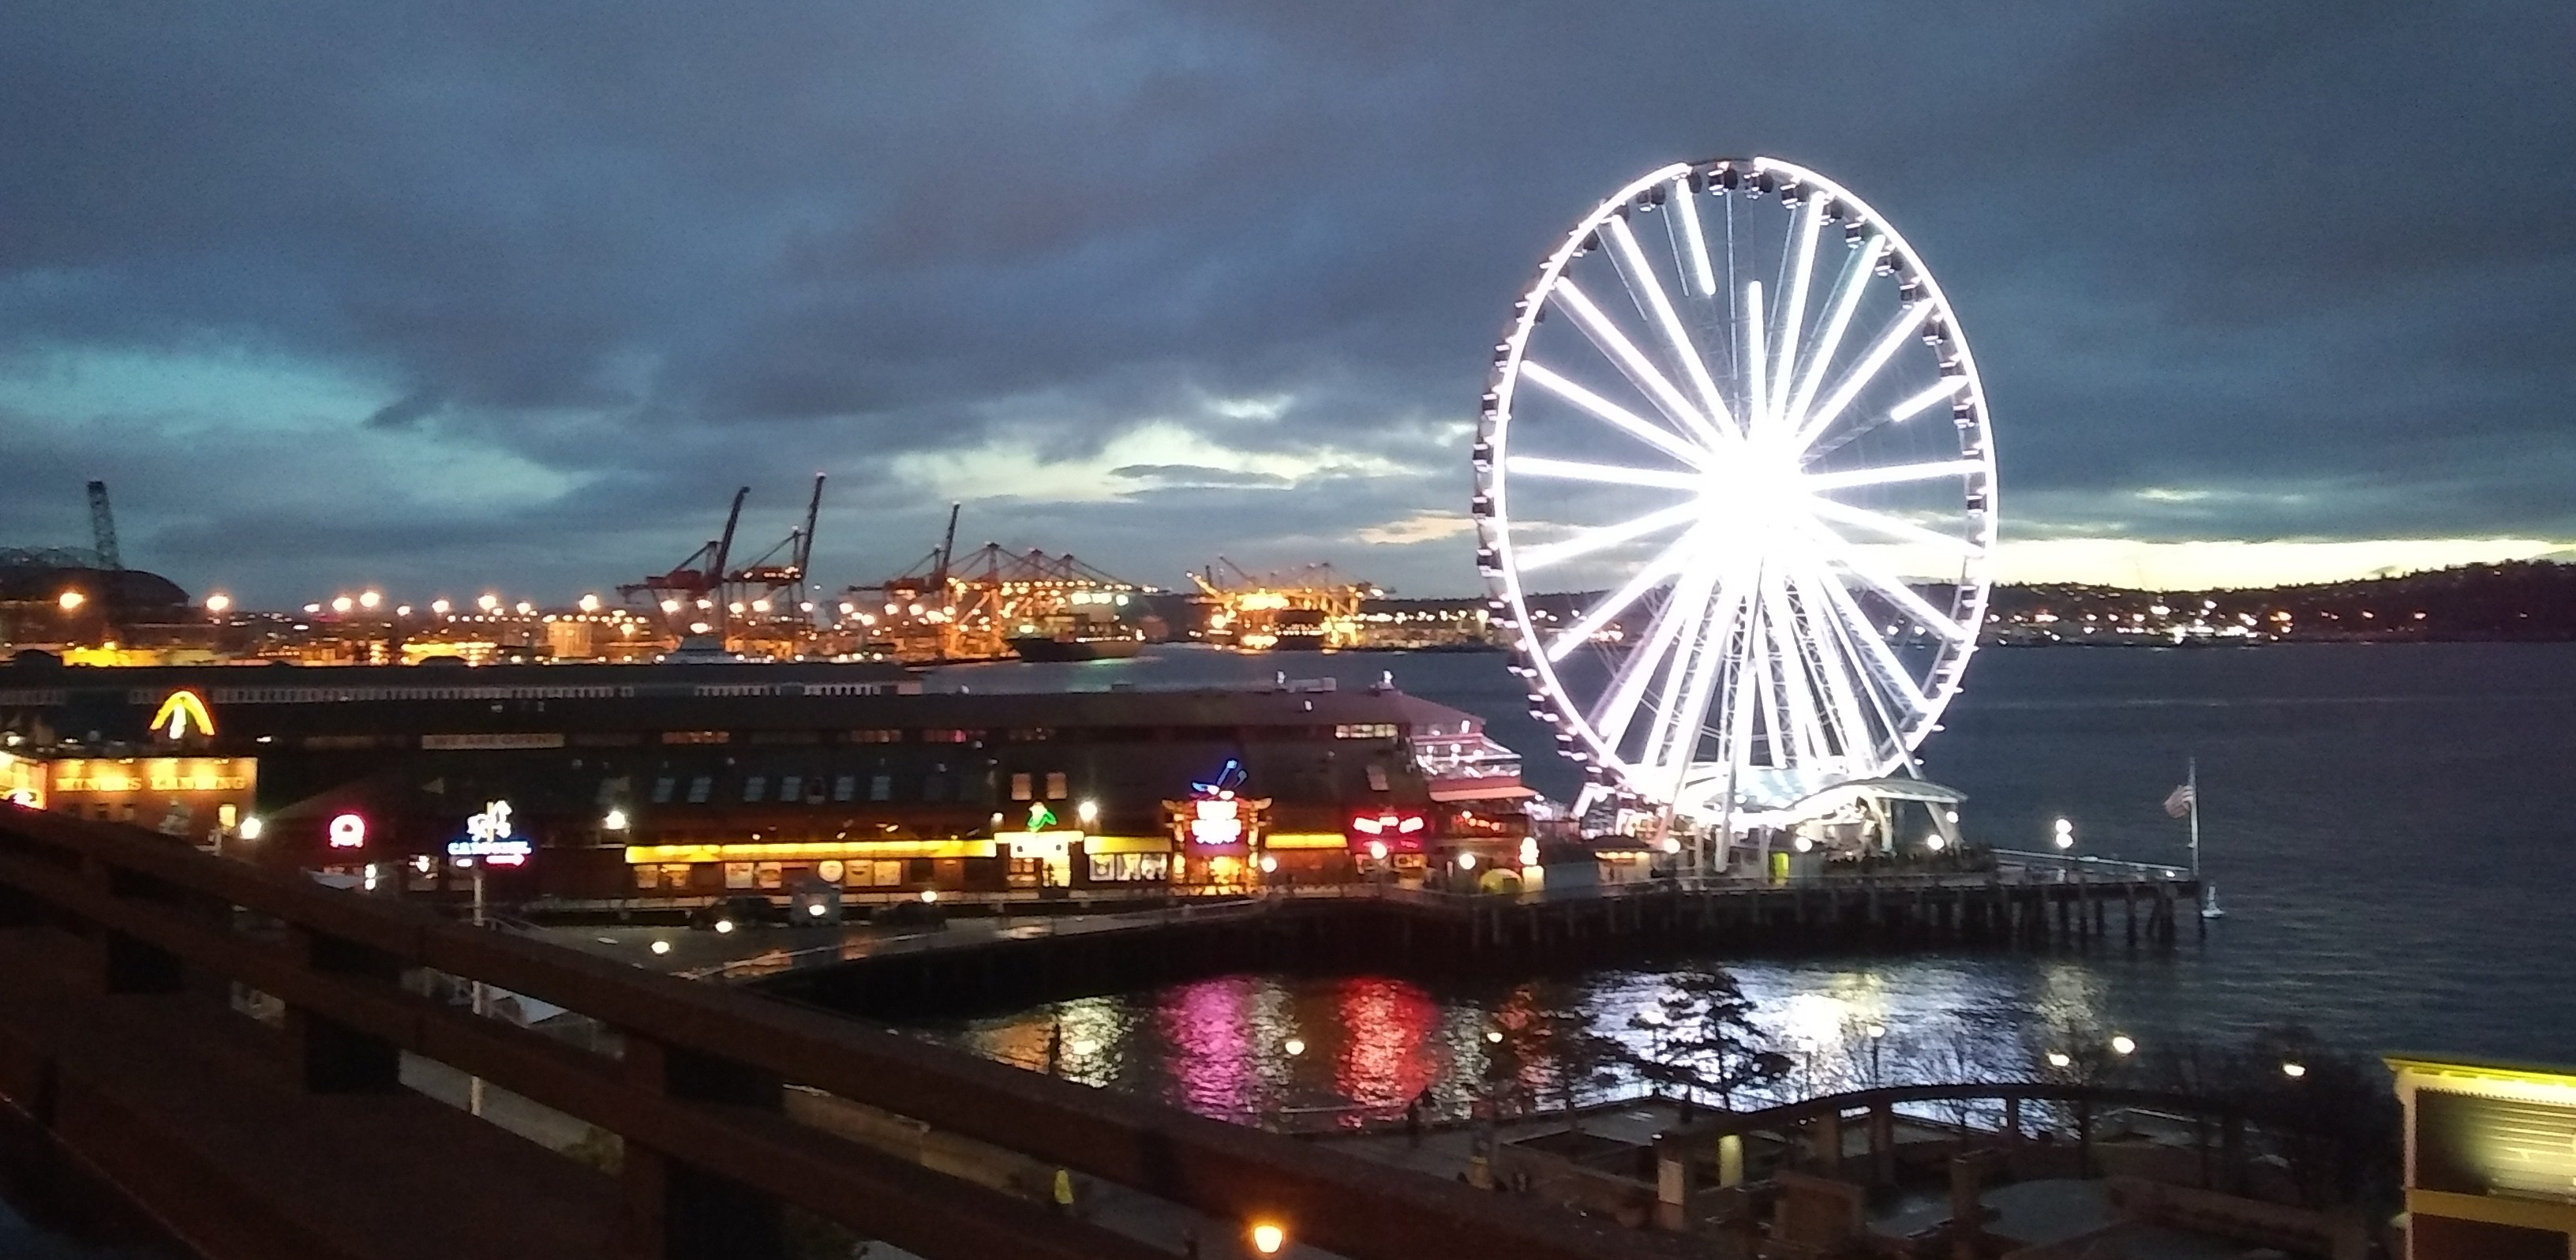 View of the Seattle docs and ferris wheel